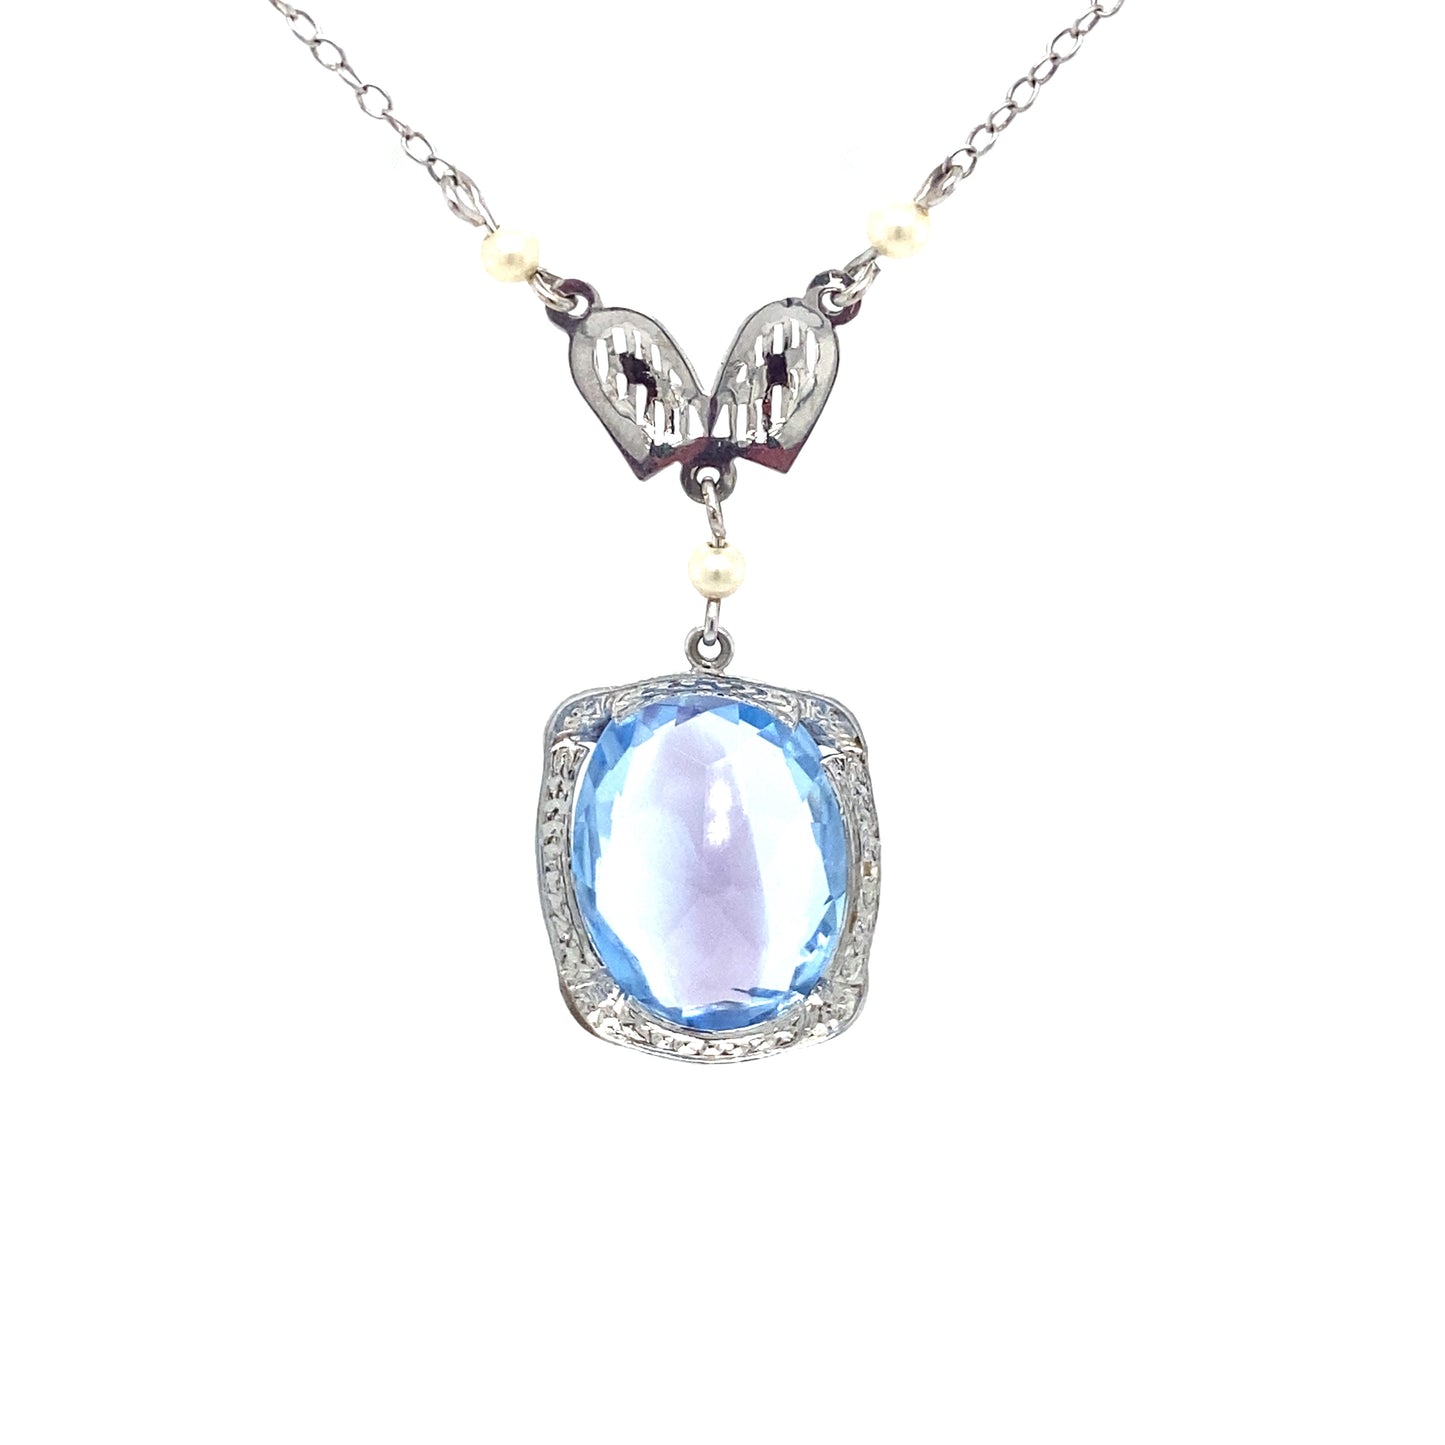 Circa 1910s Amethyst and Pearl Filigree Lavaliere Necklace in White Gold